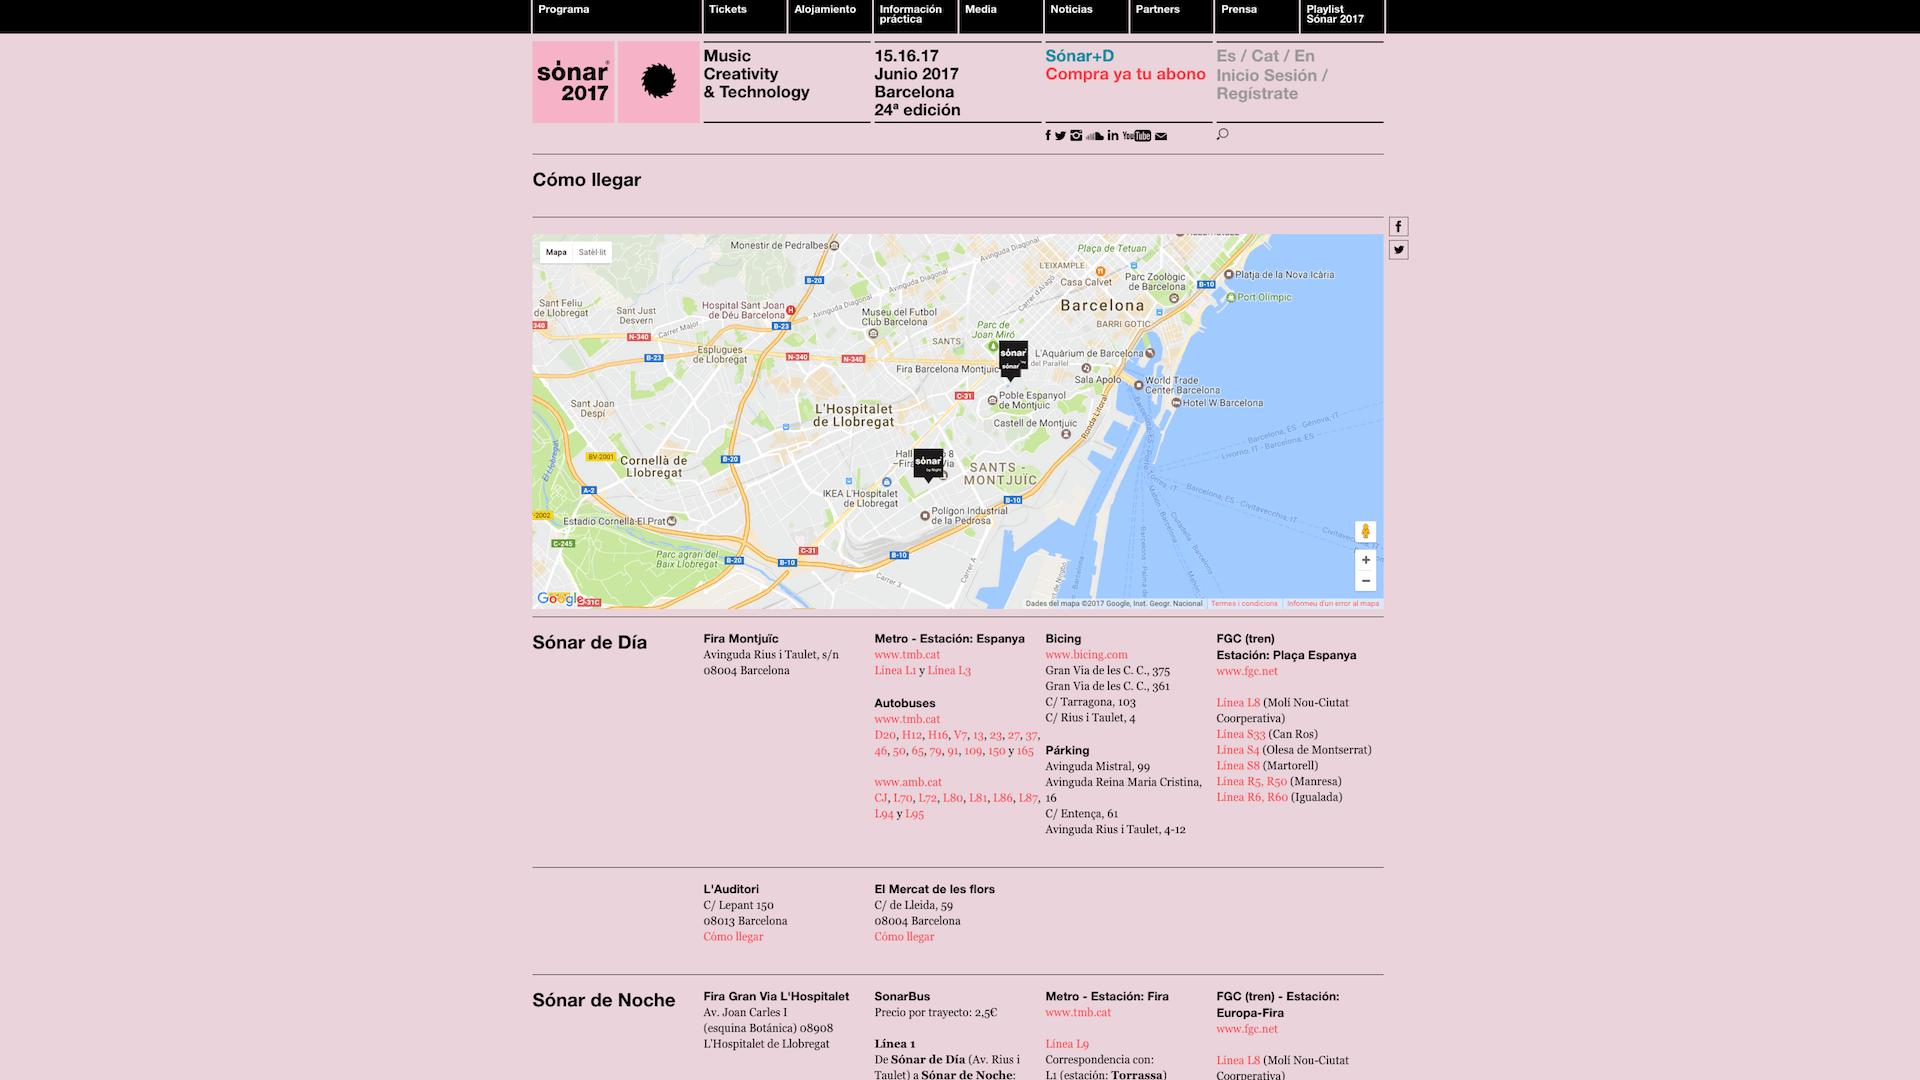 Screenshot of the "how to get" page of the Sónar 2017 website